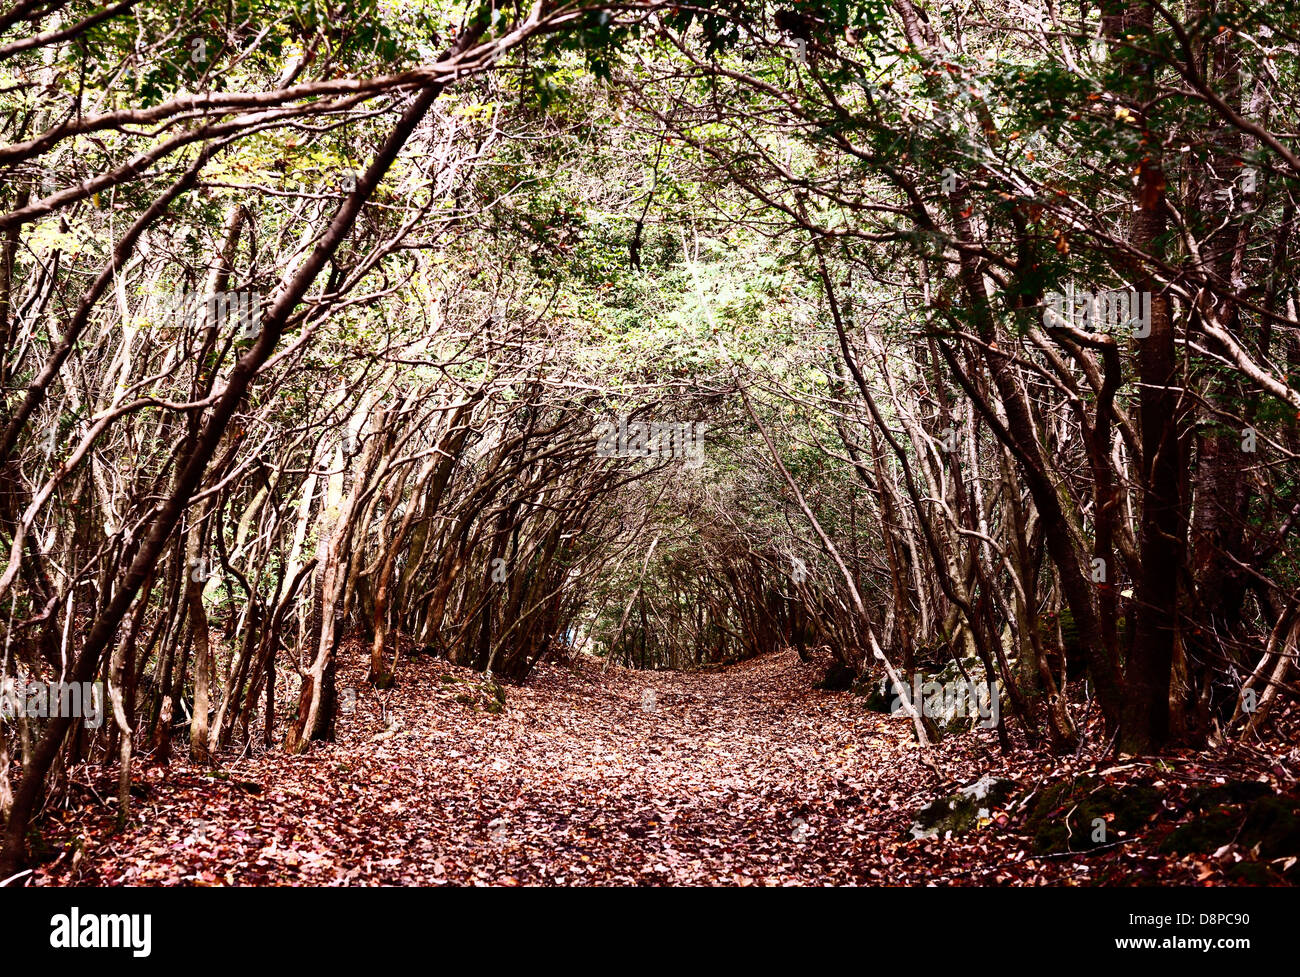 Aokigahara Forest in Japan. Stock Photo